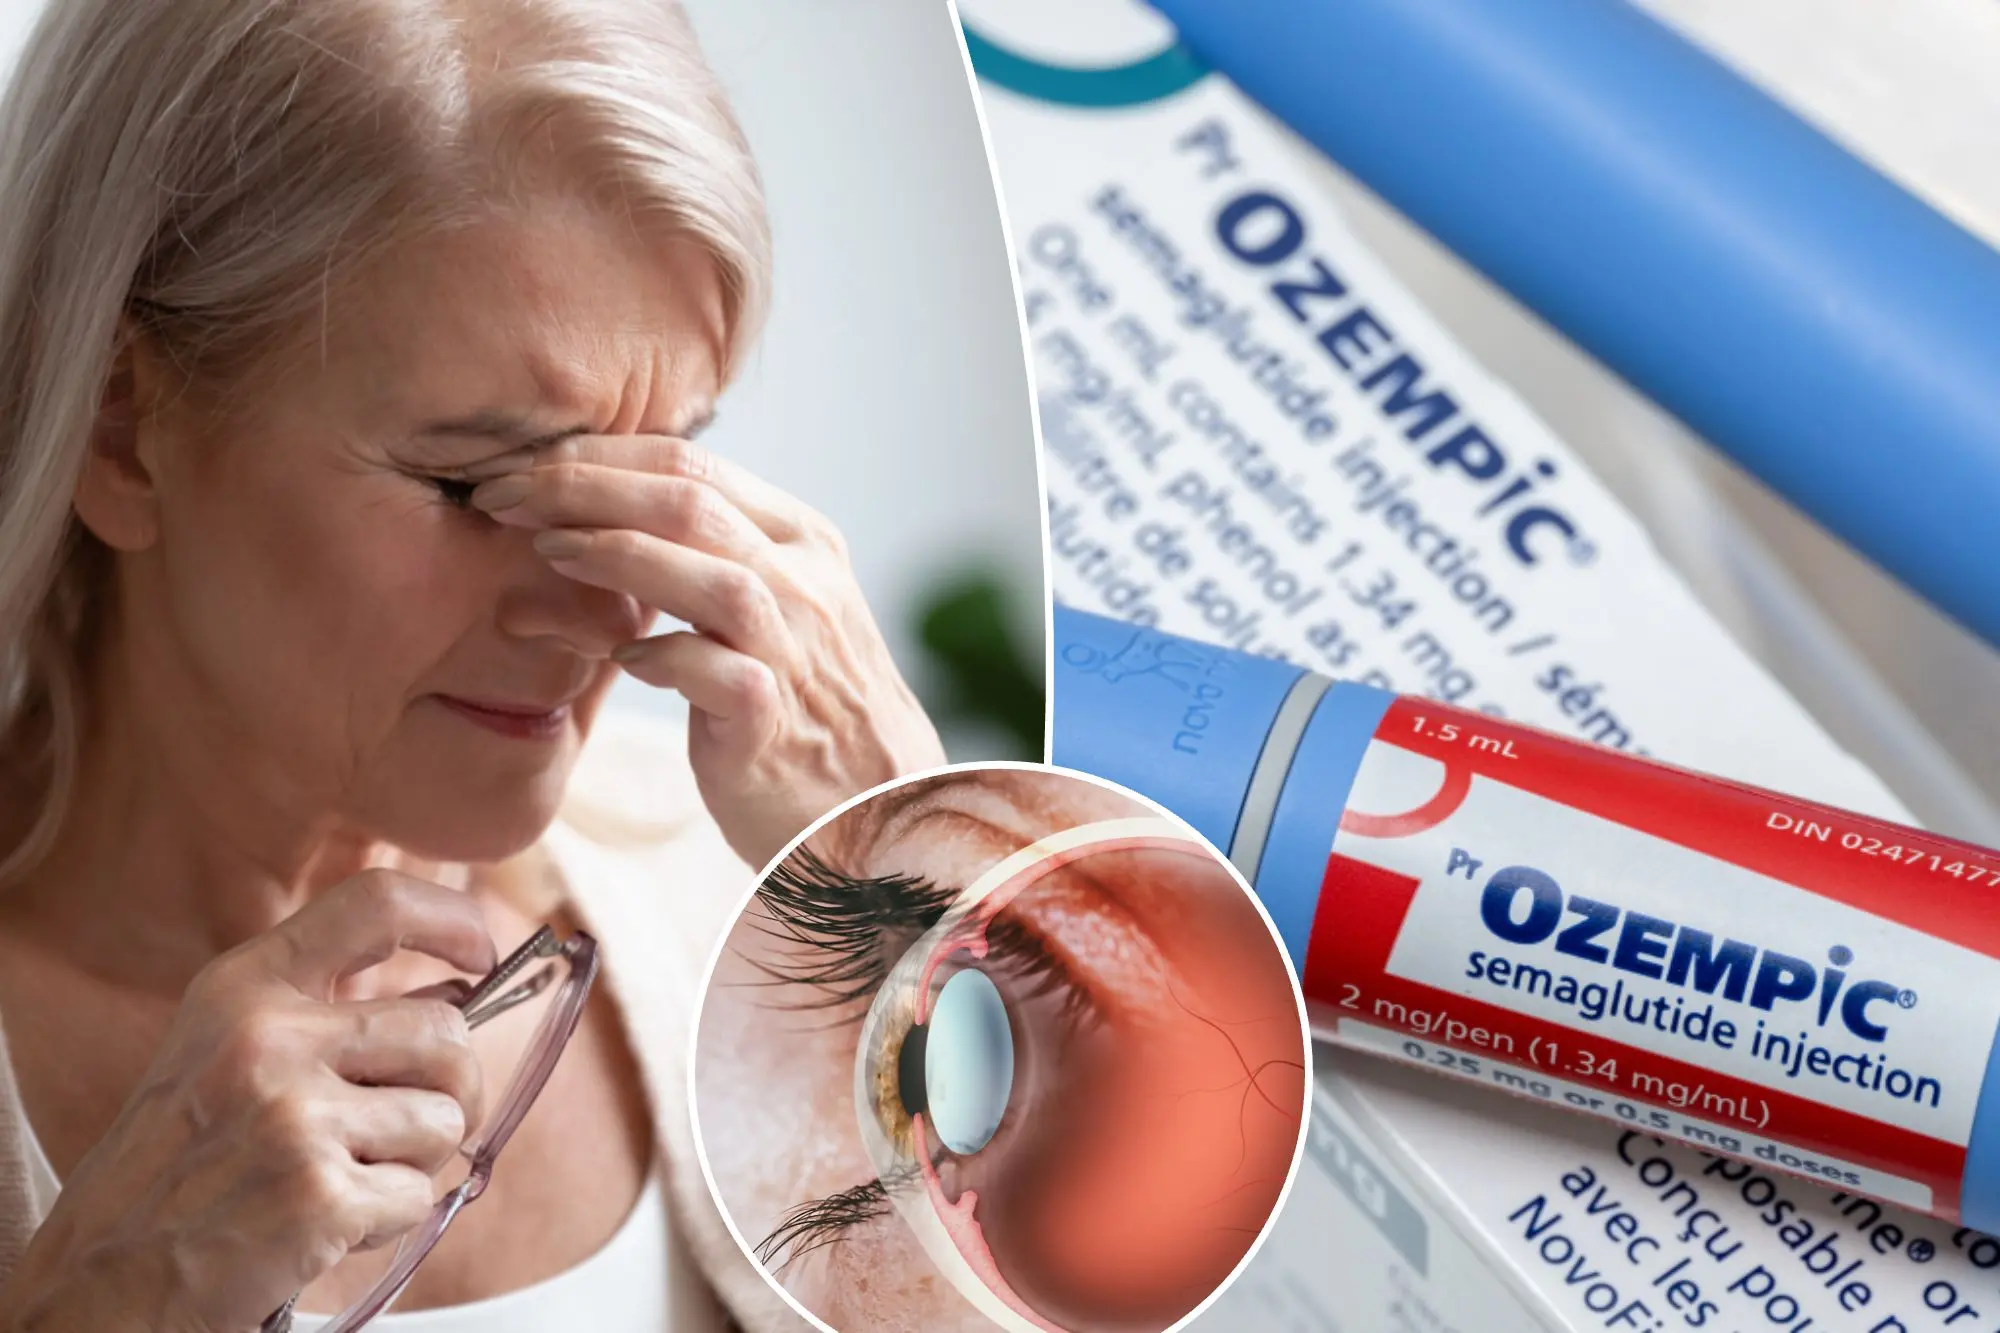 Study has found a troubling link between the use of semaglutide (marketed as Ozempic or Wegovy) and an increased risk of developing a potentially blinding eye condition